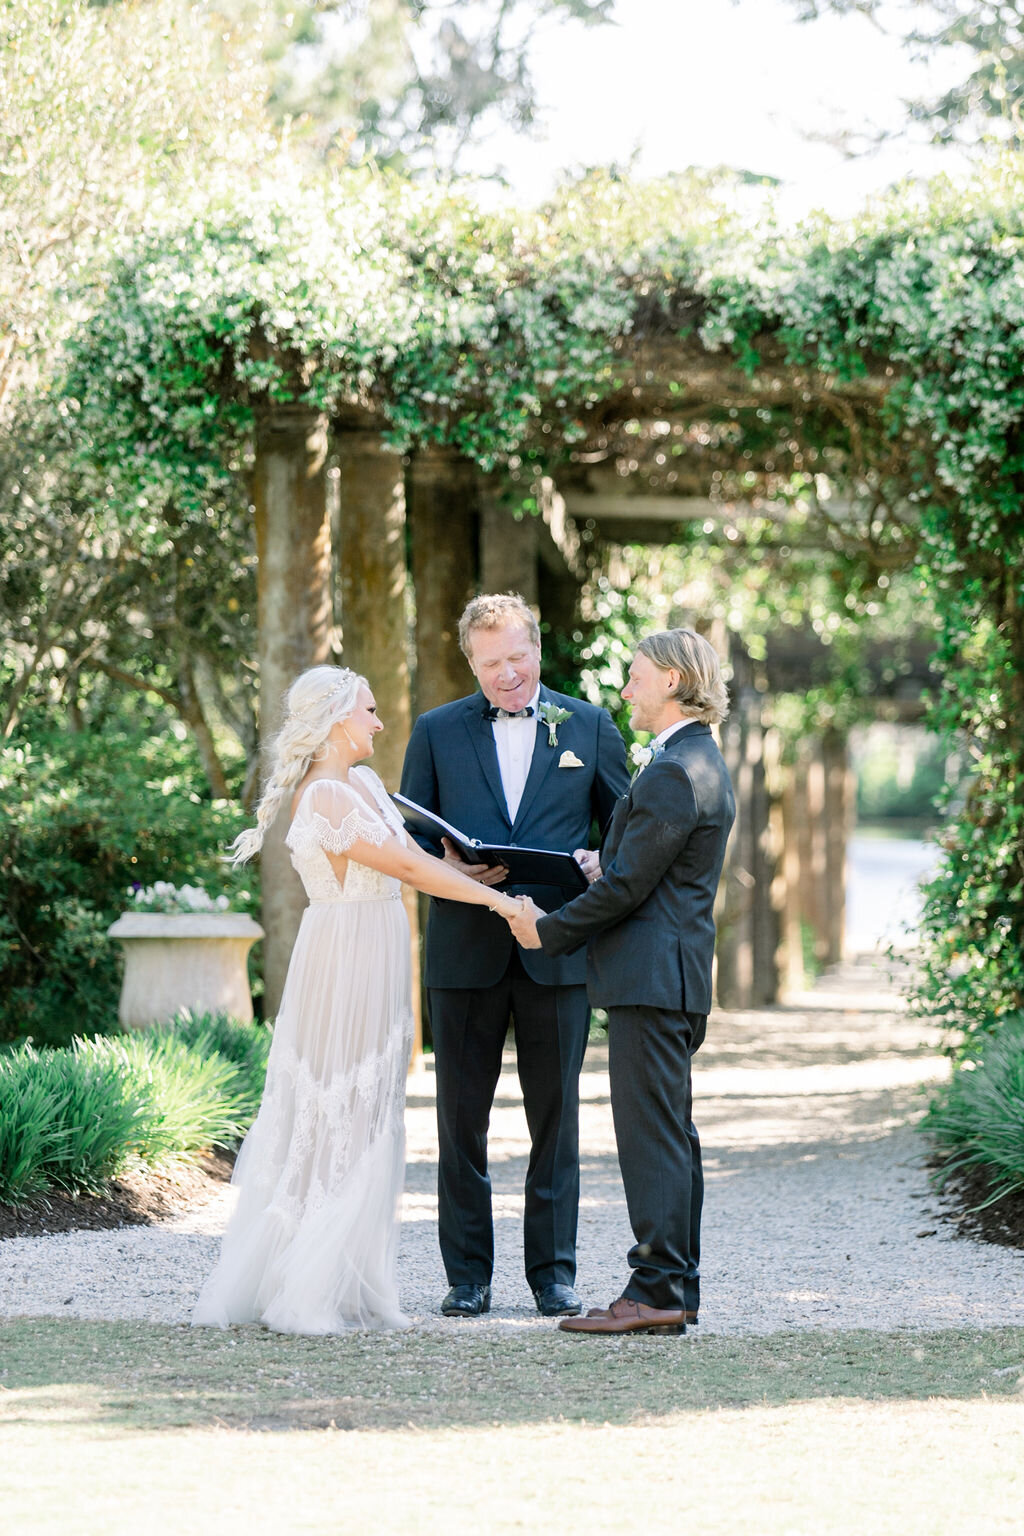 Blair&Timmy_AirlieGardens_ErinL.TaylorPhotography-455